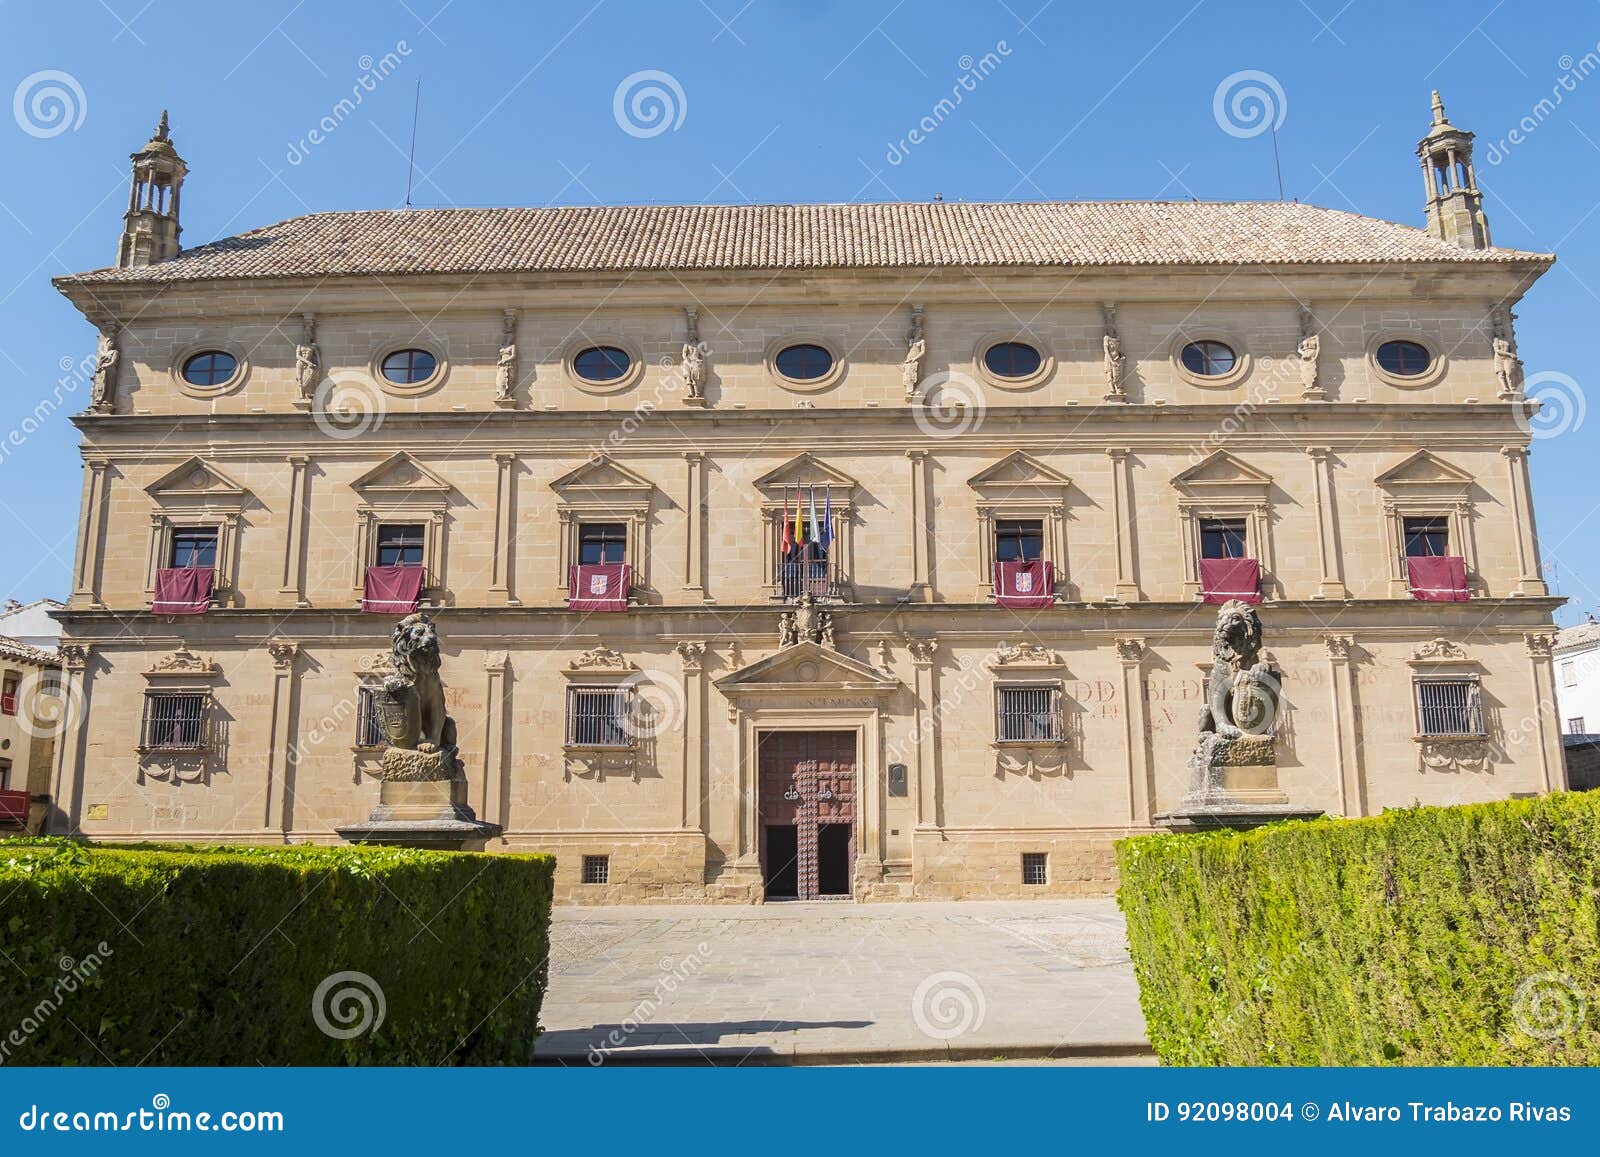 vazquez de molina palace palace of the chains, ubeda, spain